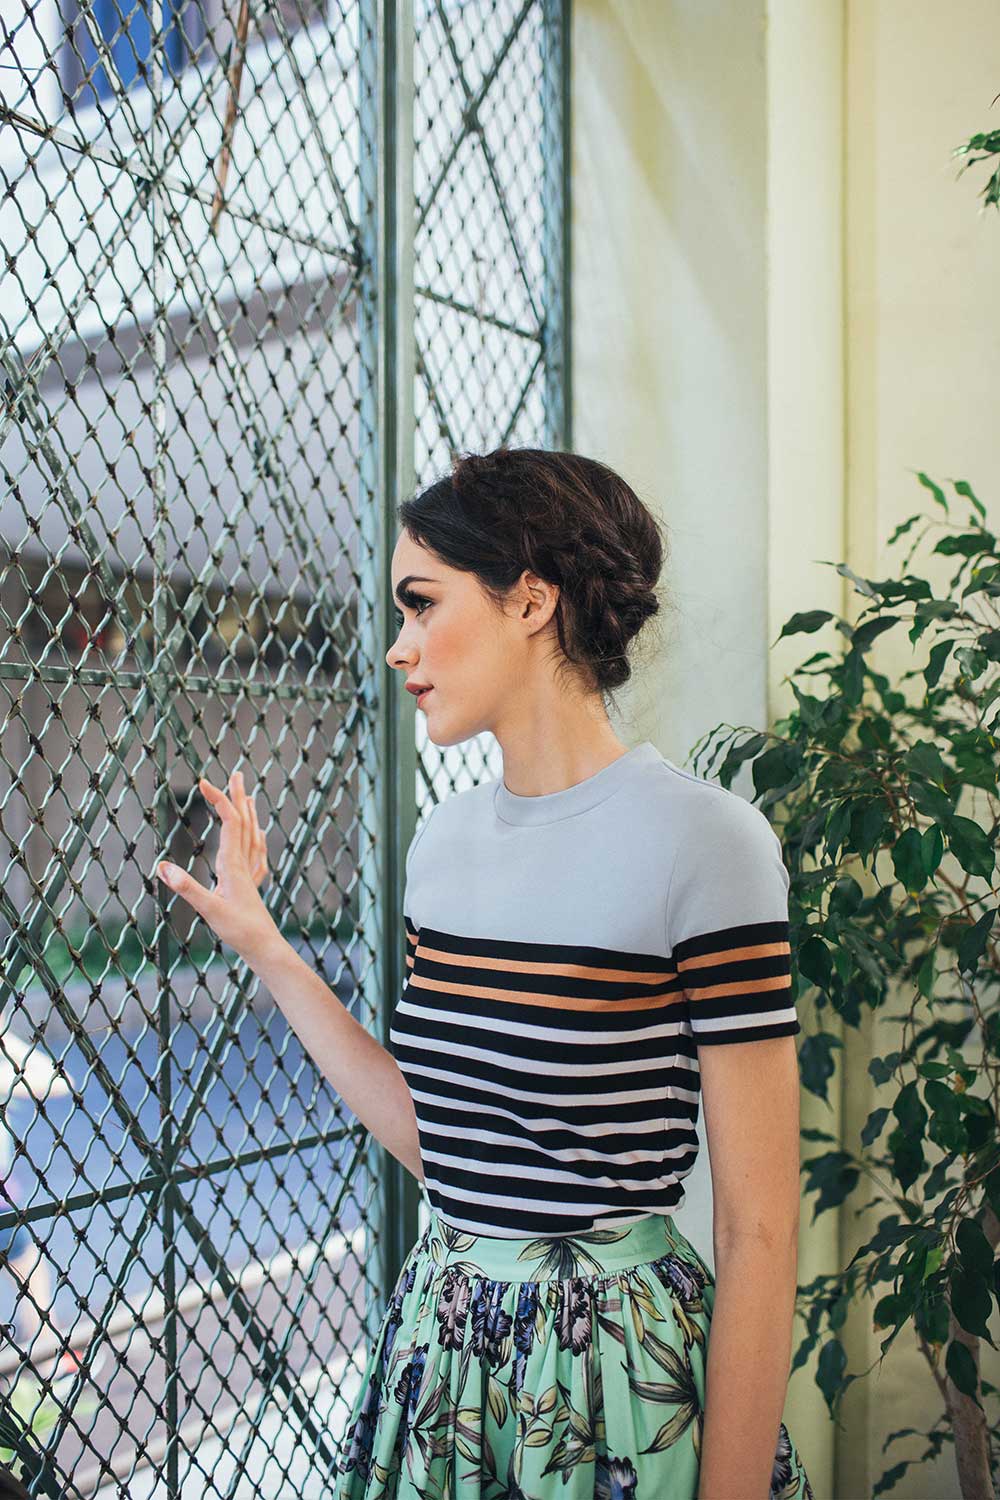 woman in striped shirt and flowered skirt with hand on chain link fence